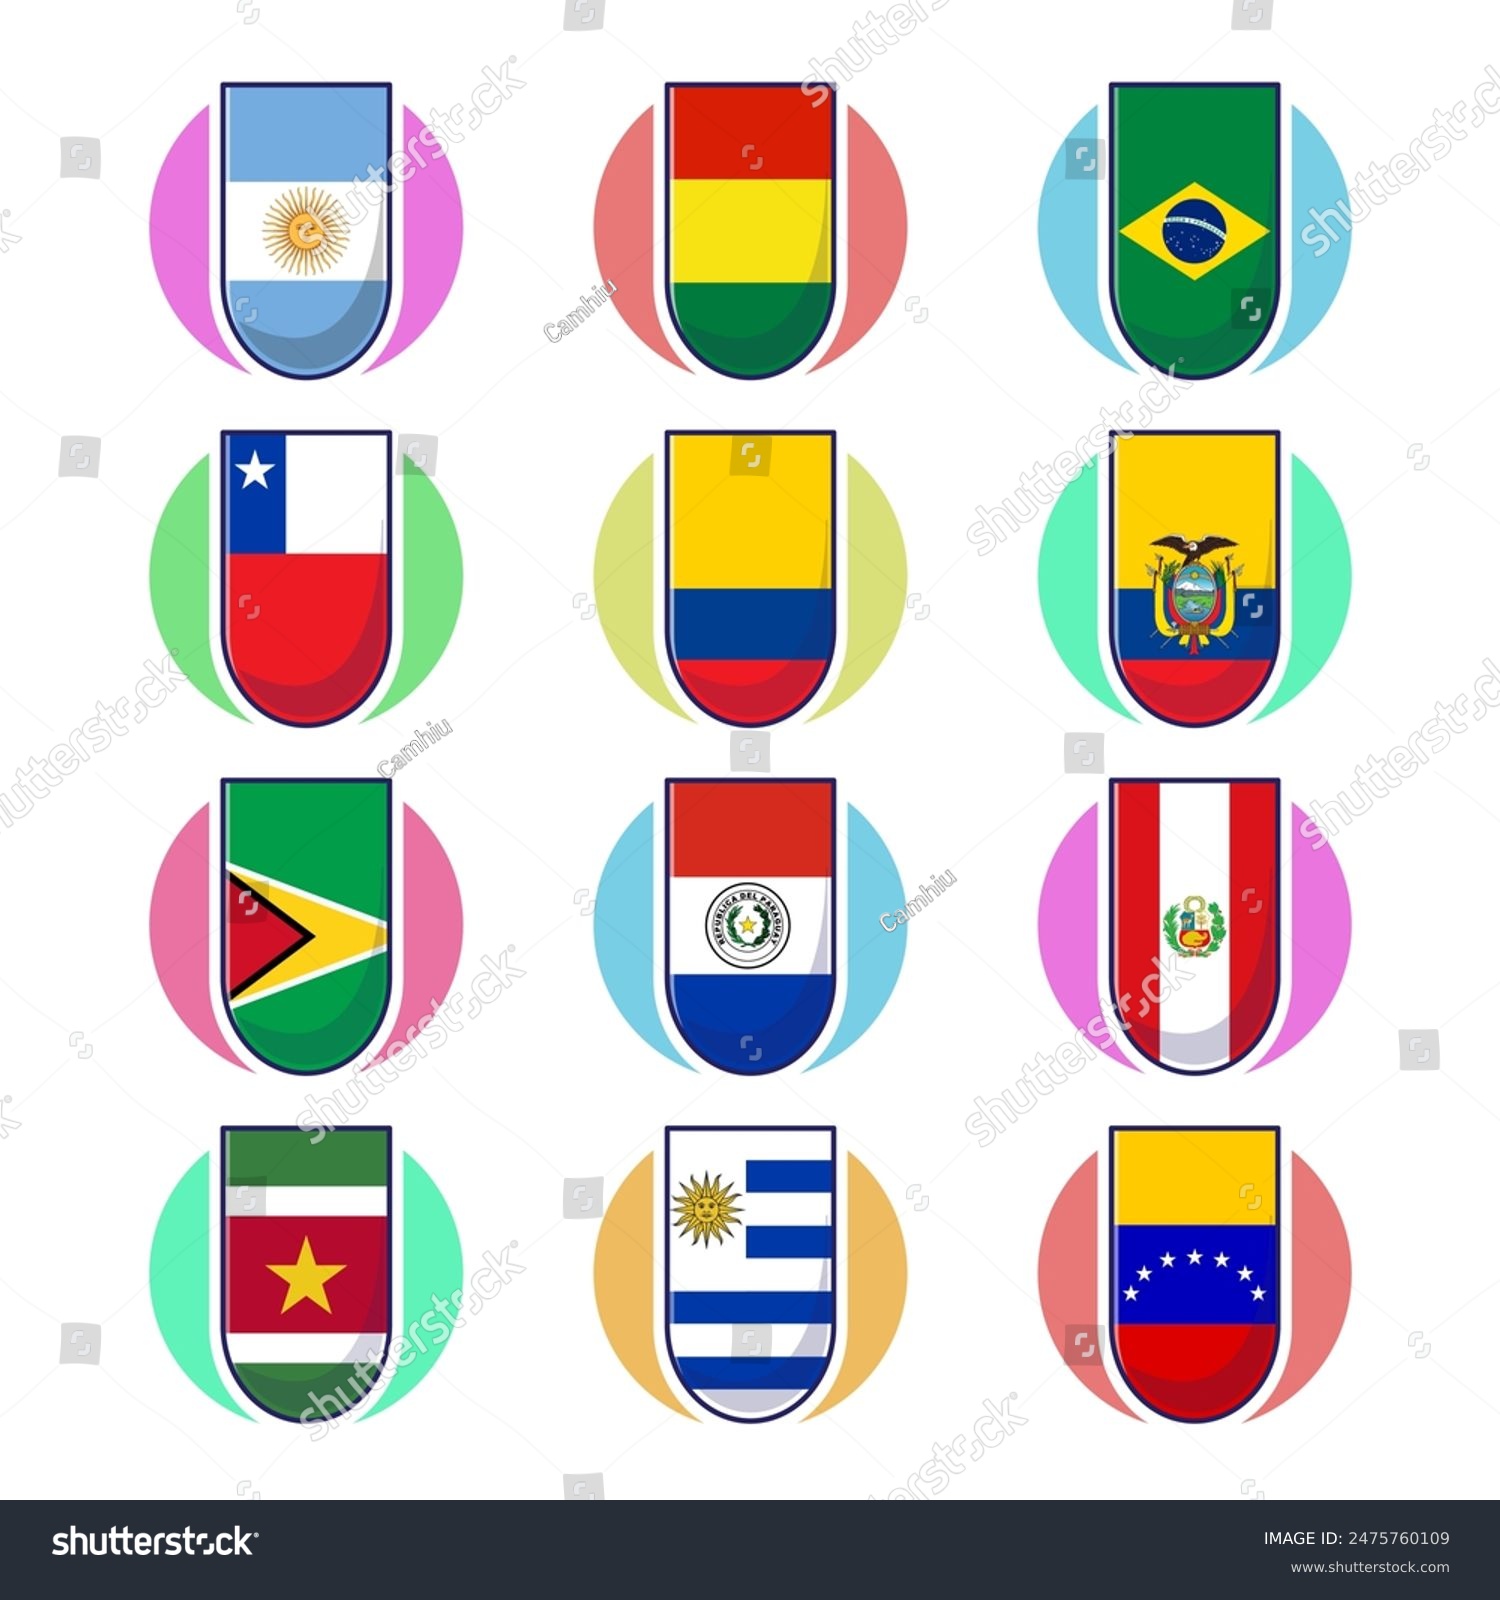 South american continents flags. Cute vector element design, travel symbols, landmark symbols, geography and map flags emblem.